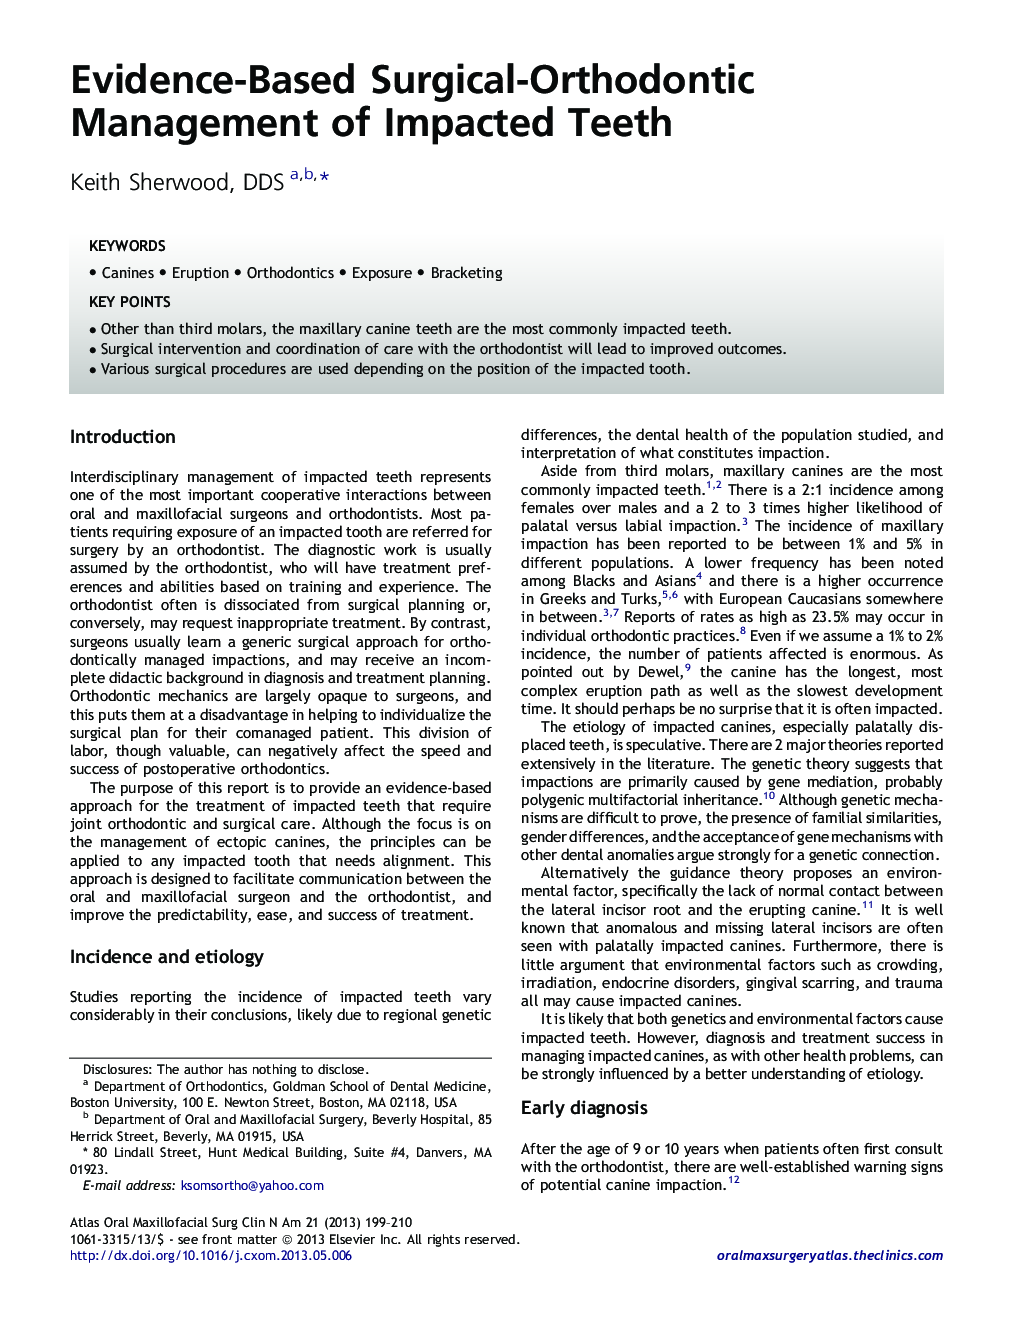 Evidence-Based Surgical-Orthodontic Management of Impacted Teeth